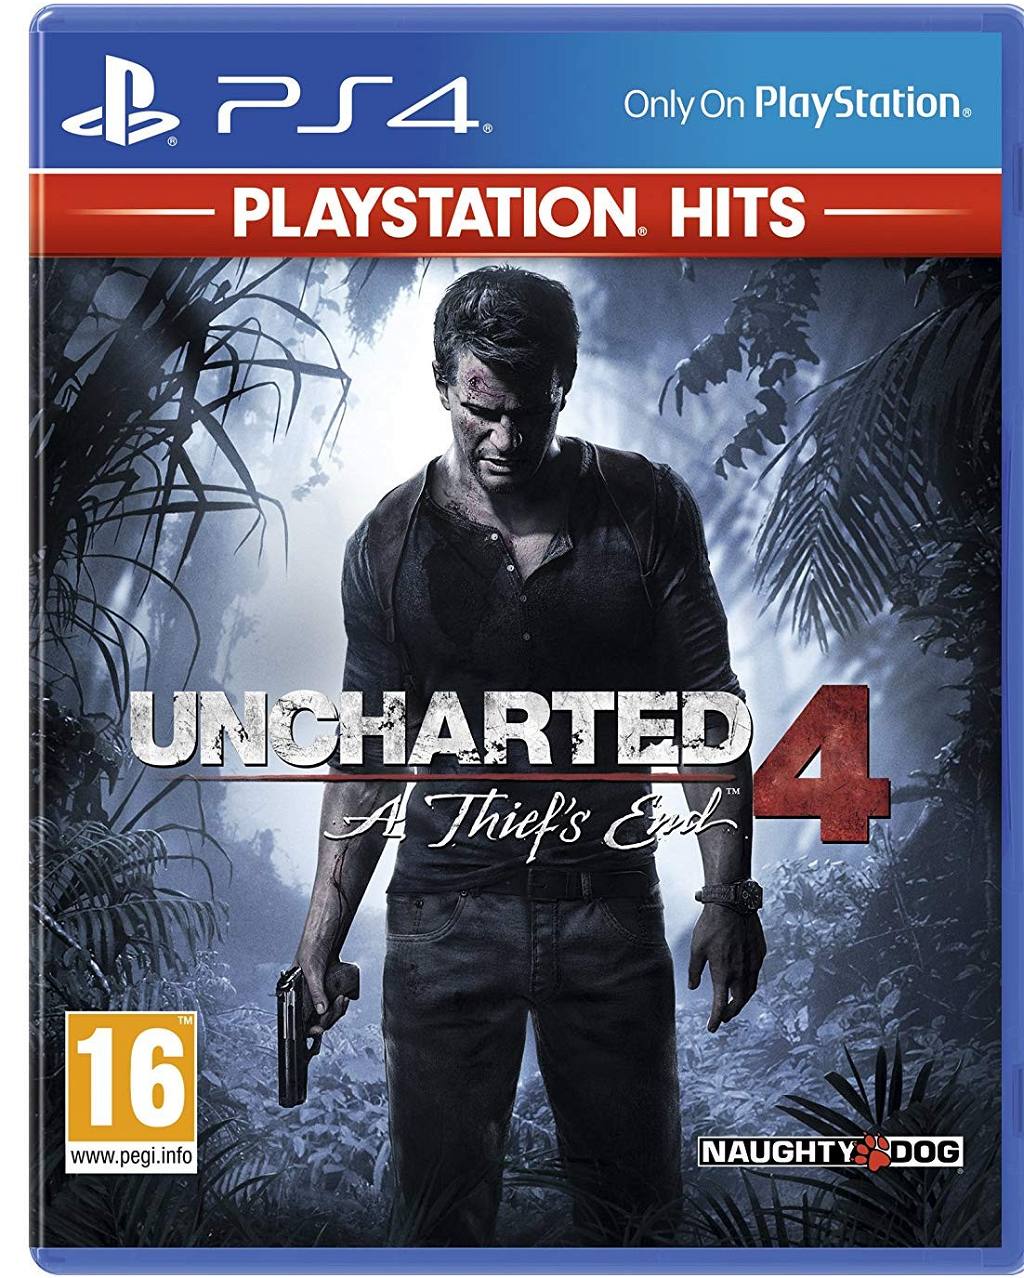 Uncharted 4: A End Hits) for PlayStation 4